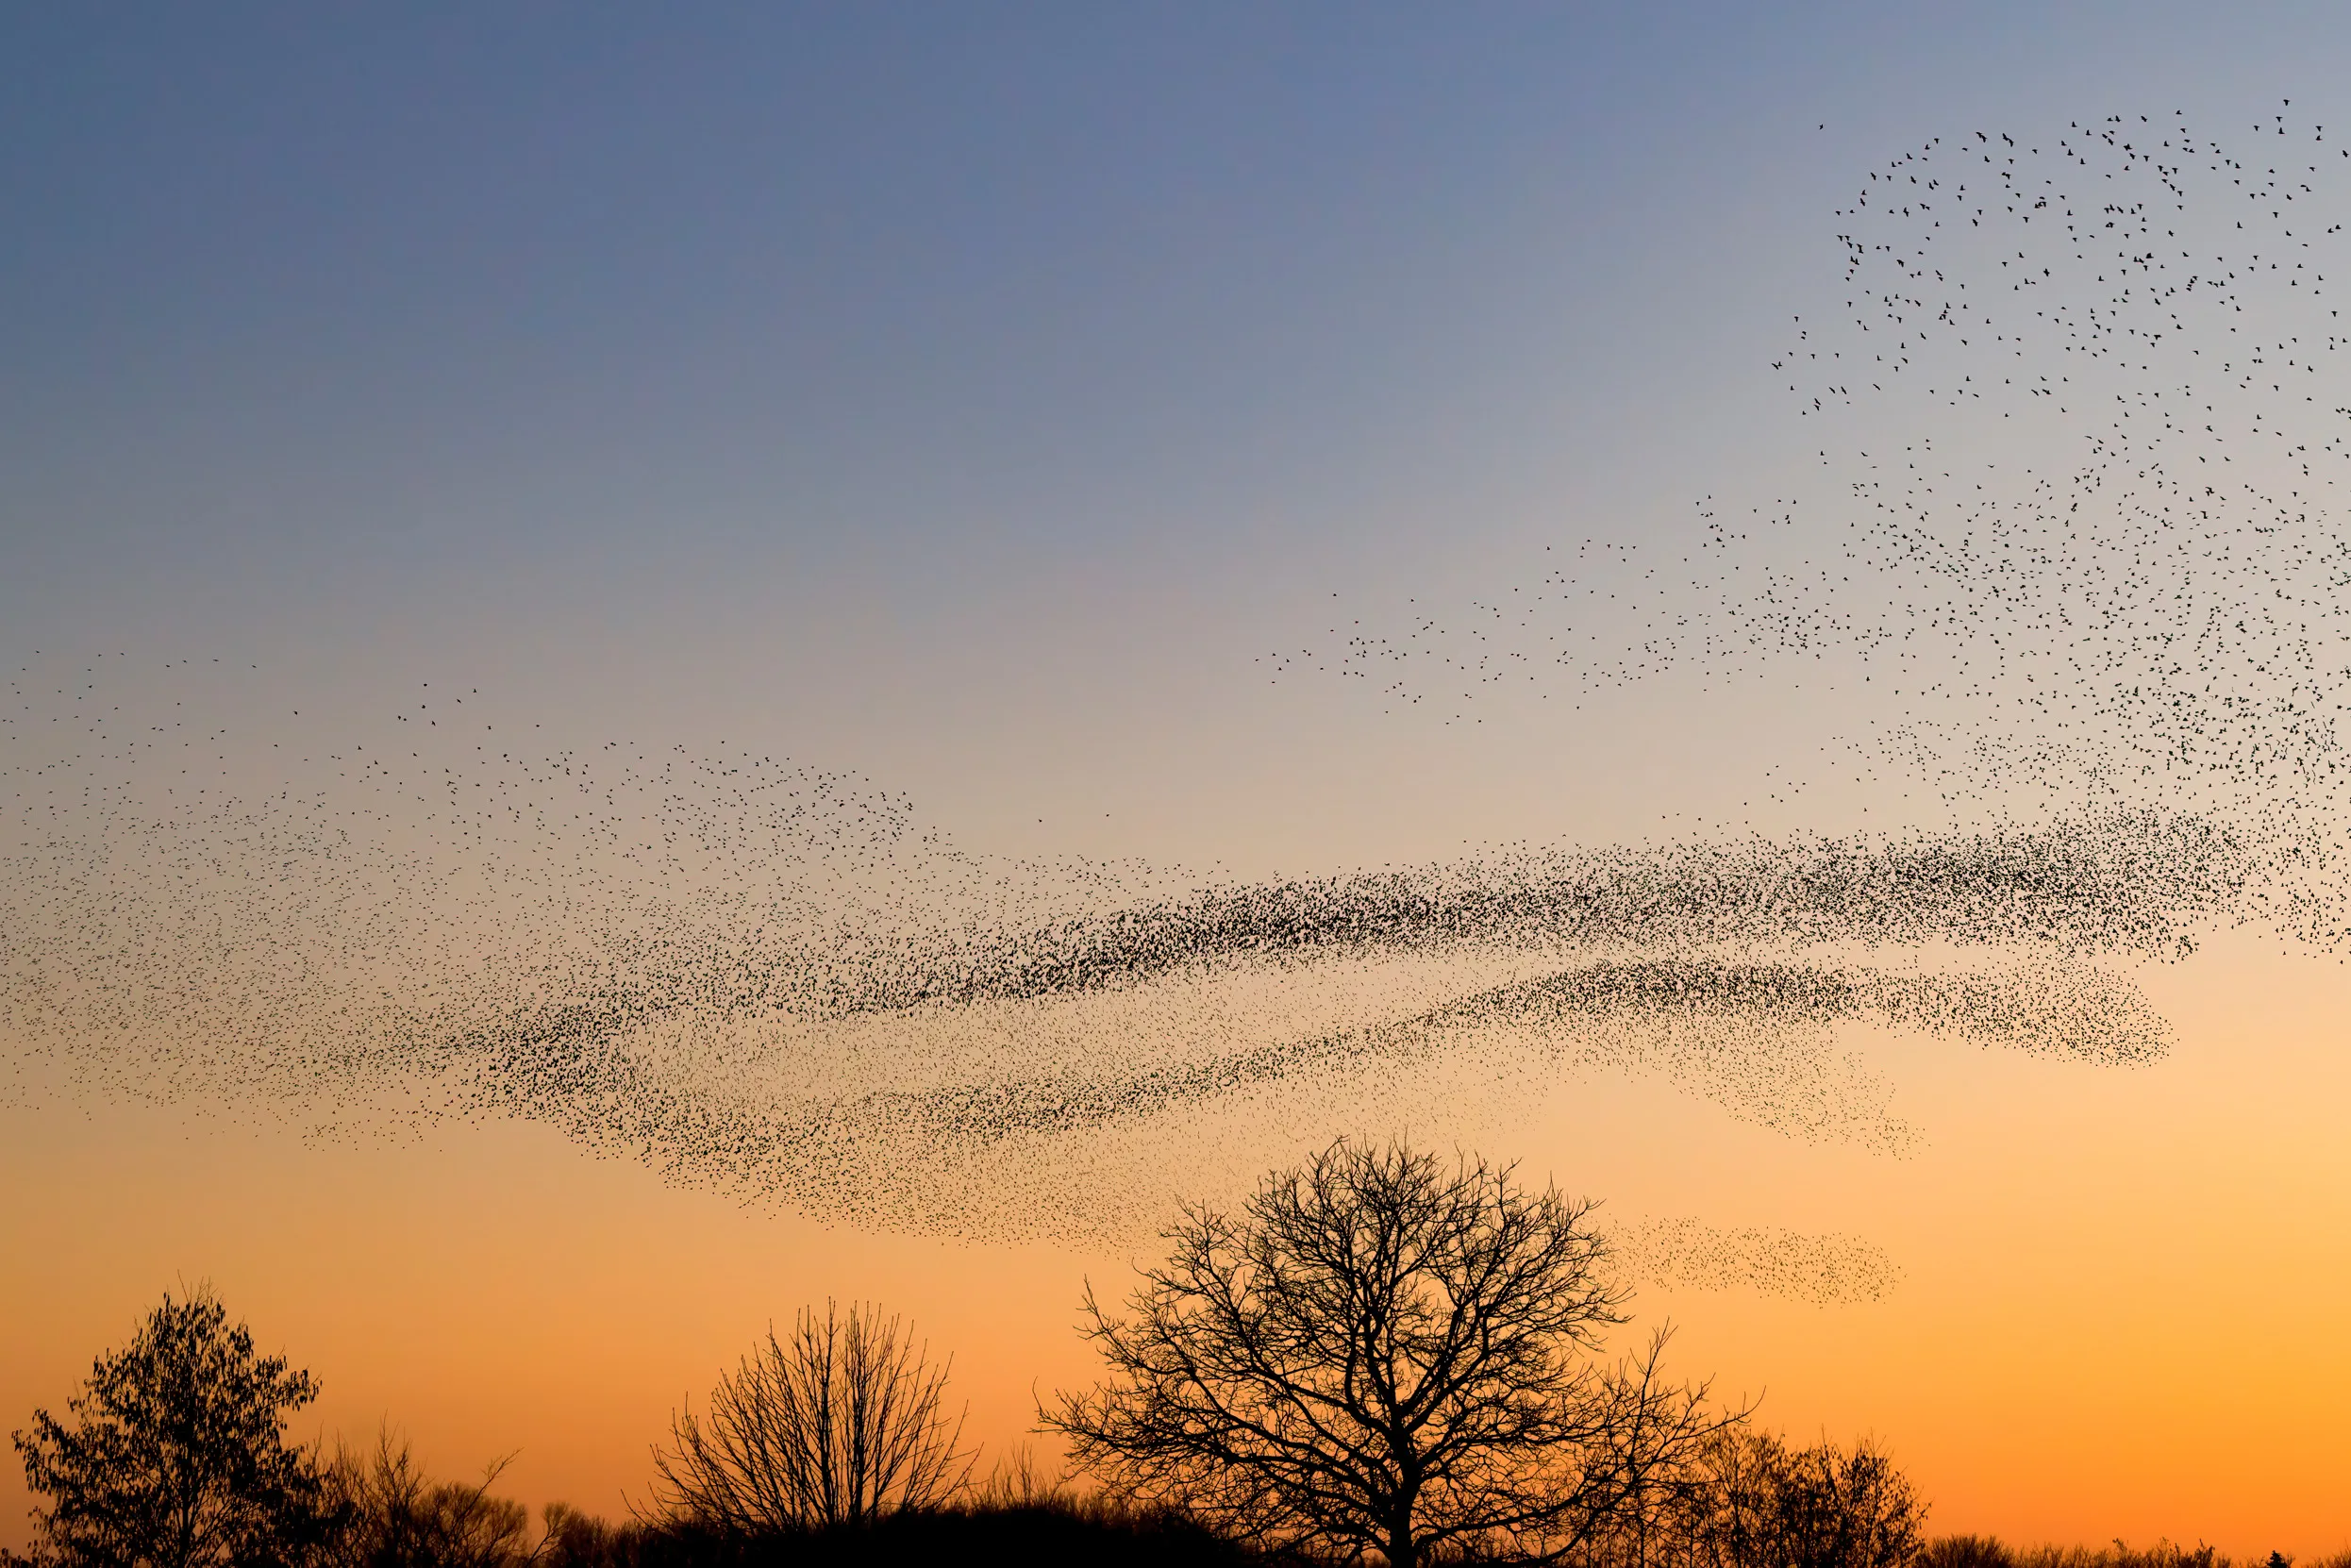 A Starling murmuration flying overhead in a sunset sky.